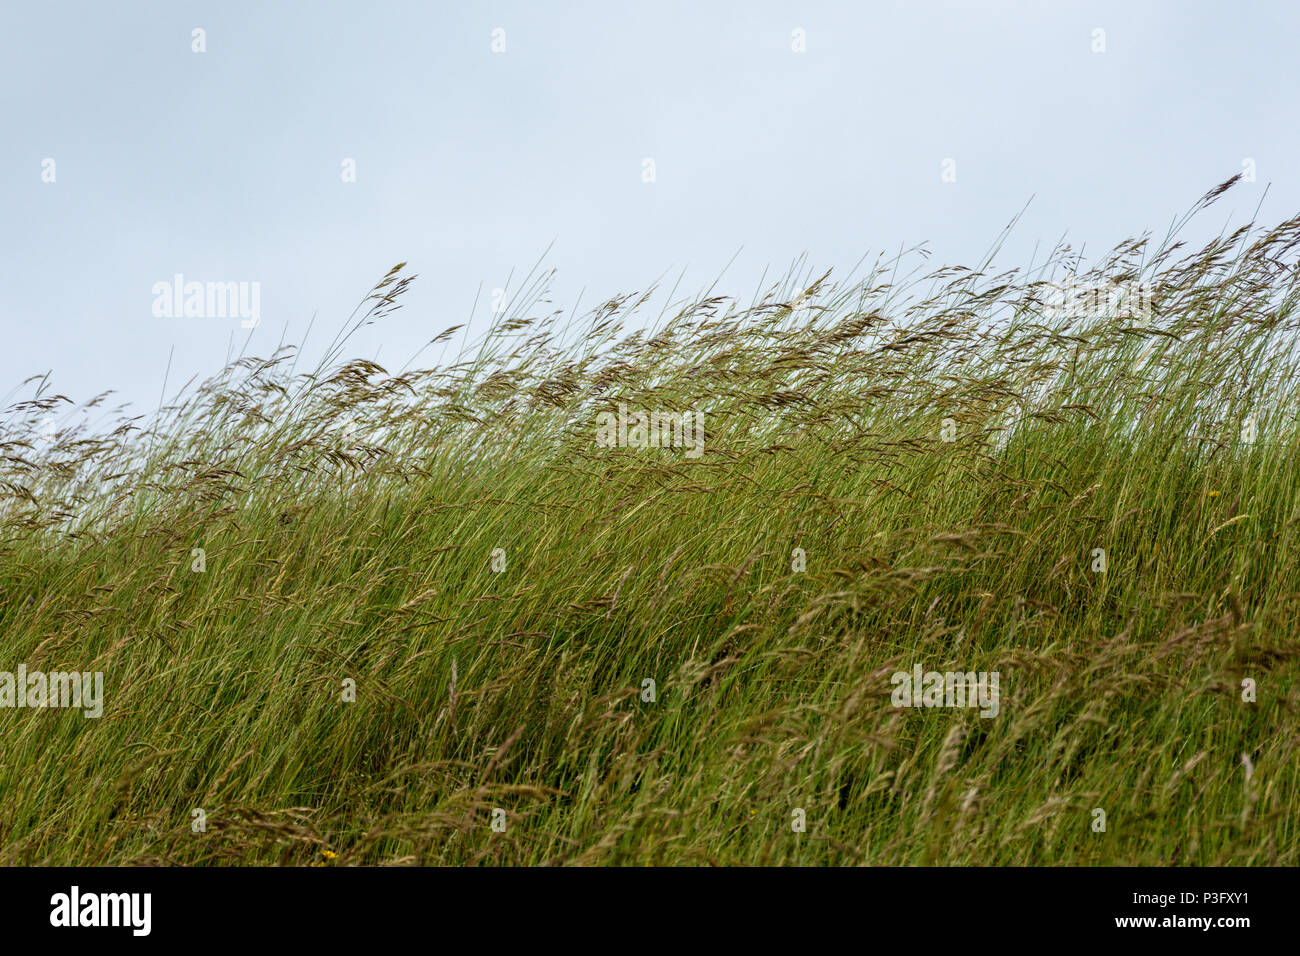 Tall grasses waving in the wind on a hill side of an iron age hill fort against a grey sky Stock Photo